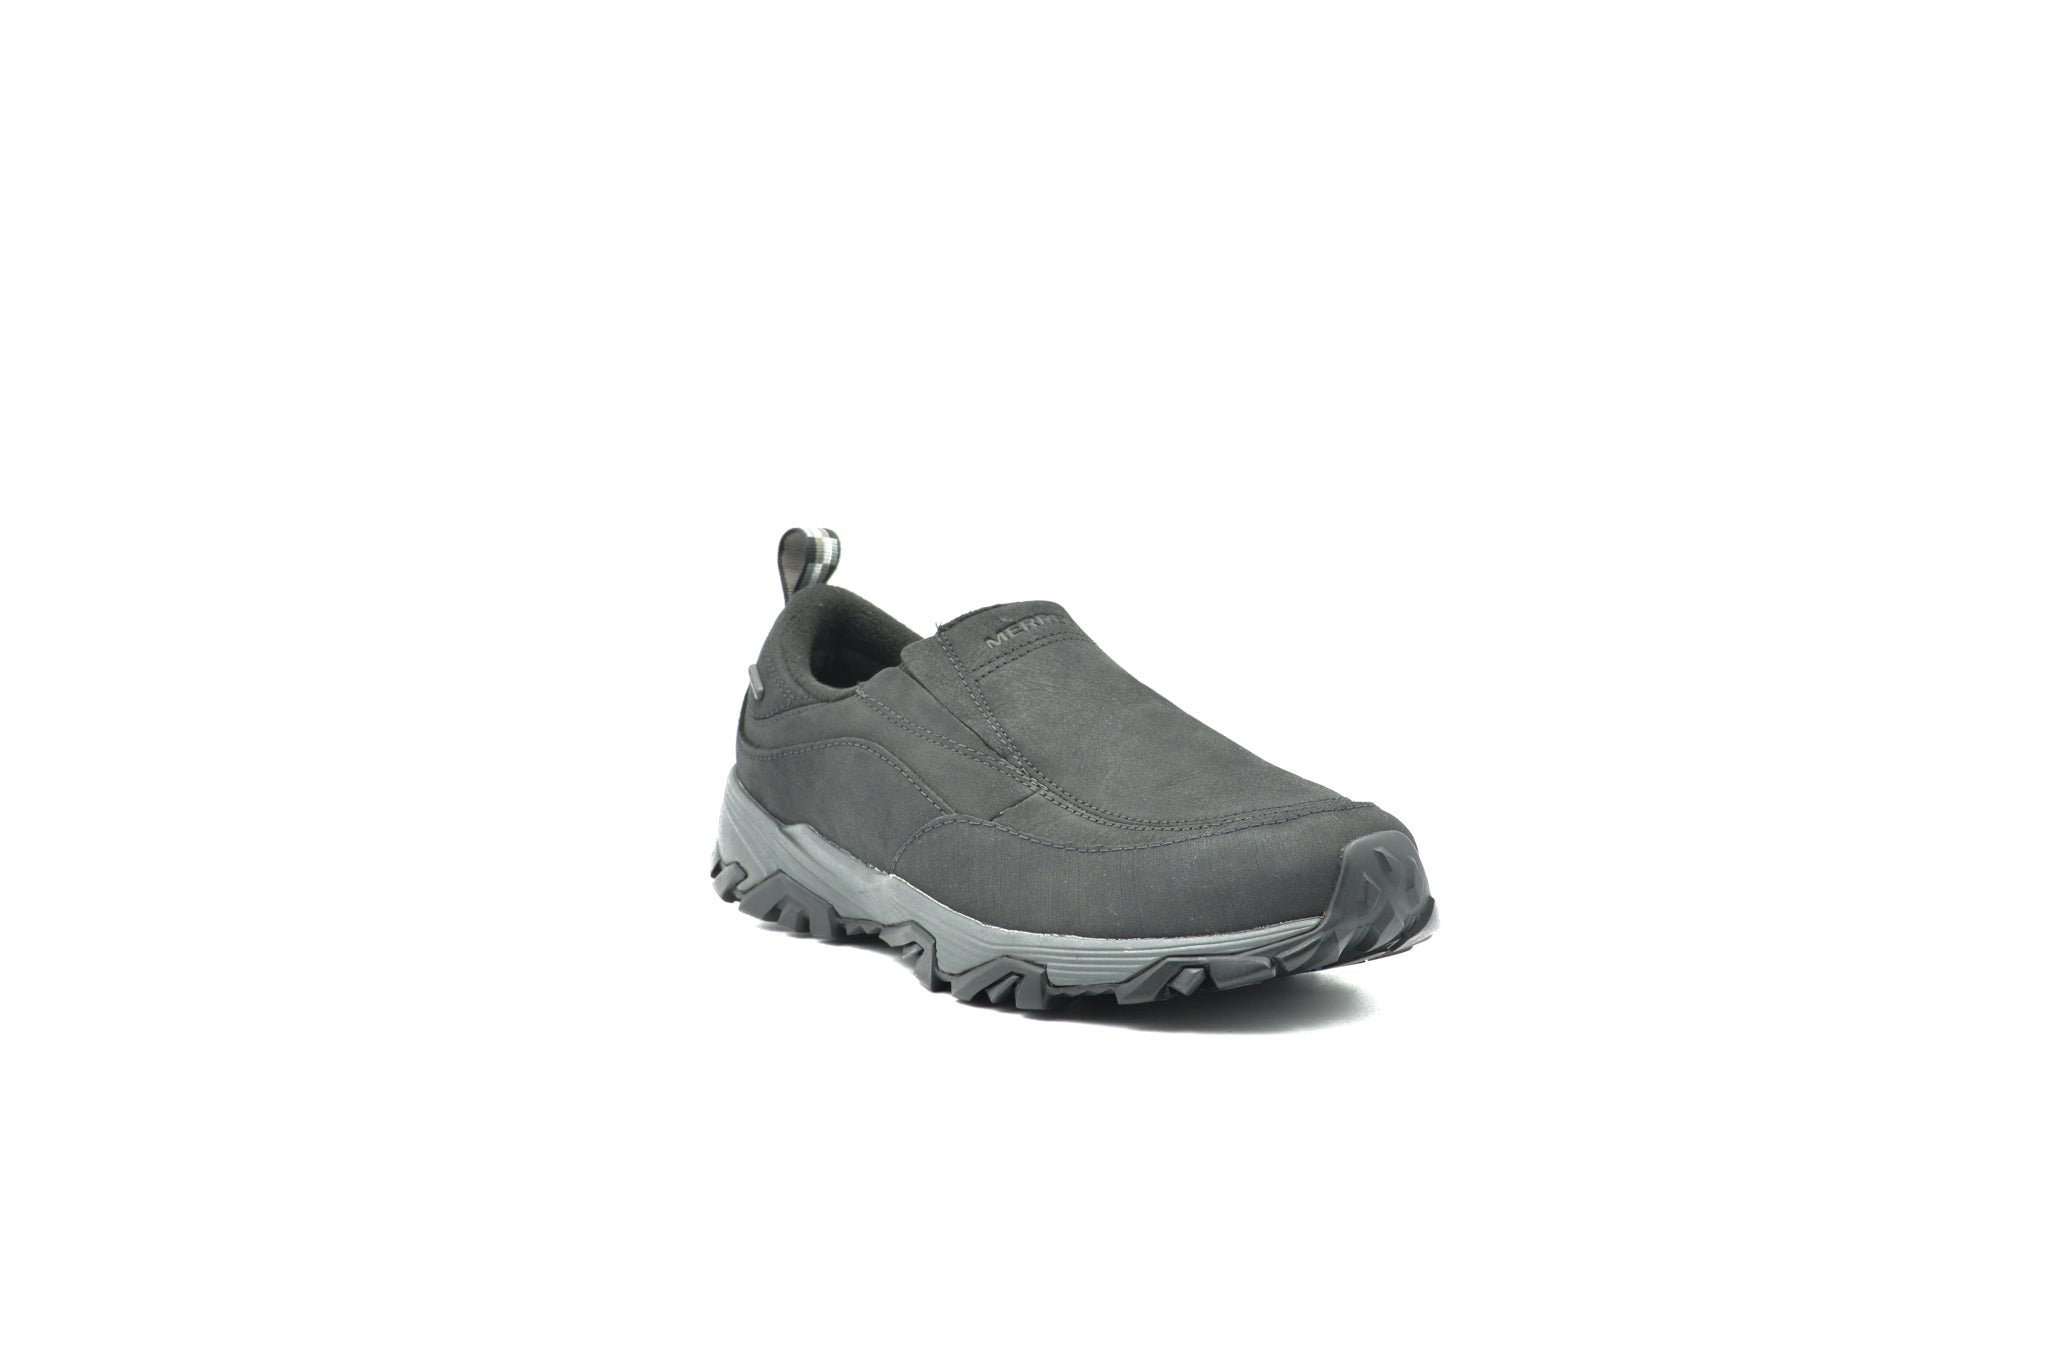 MERRELL ColdPack Ice+ Moc